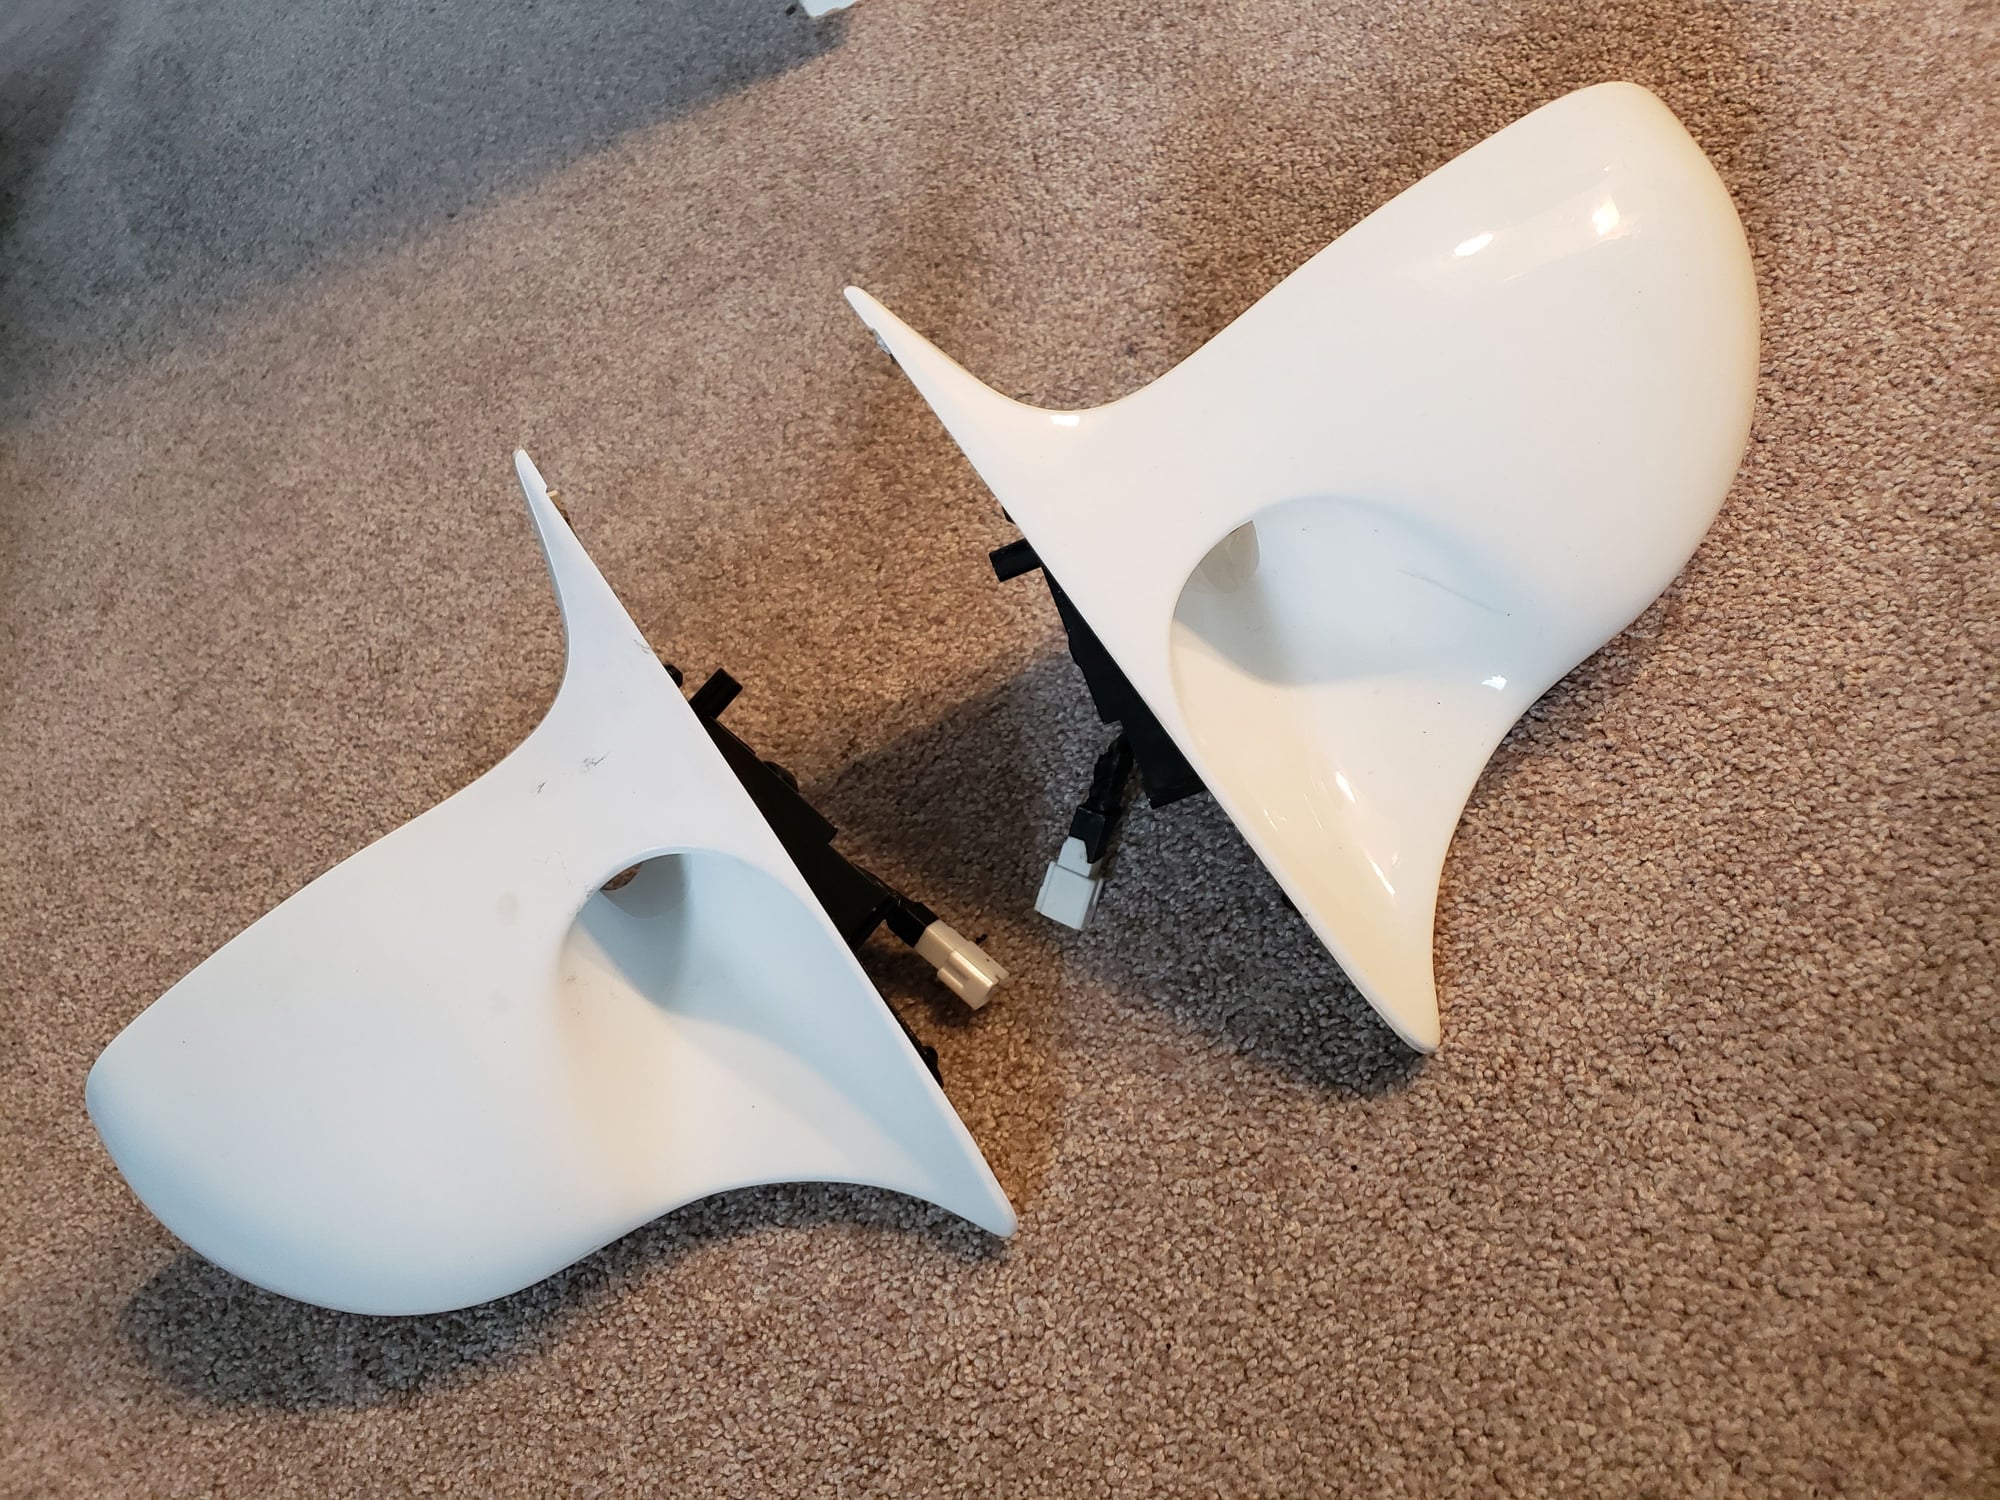 Exterior Body Parts - S5 OEM "aero" mirrors - Used - 1989 to 1991 Mazda RX-7 - Asheville, NC 28803, United States